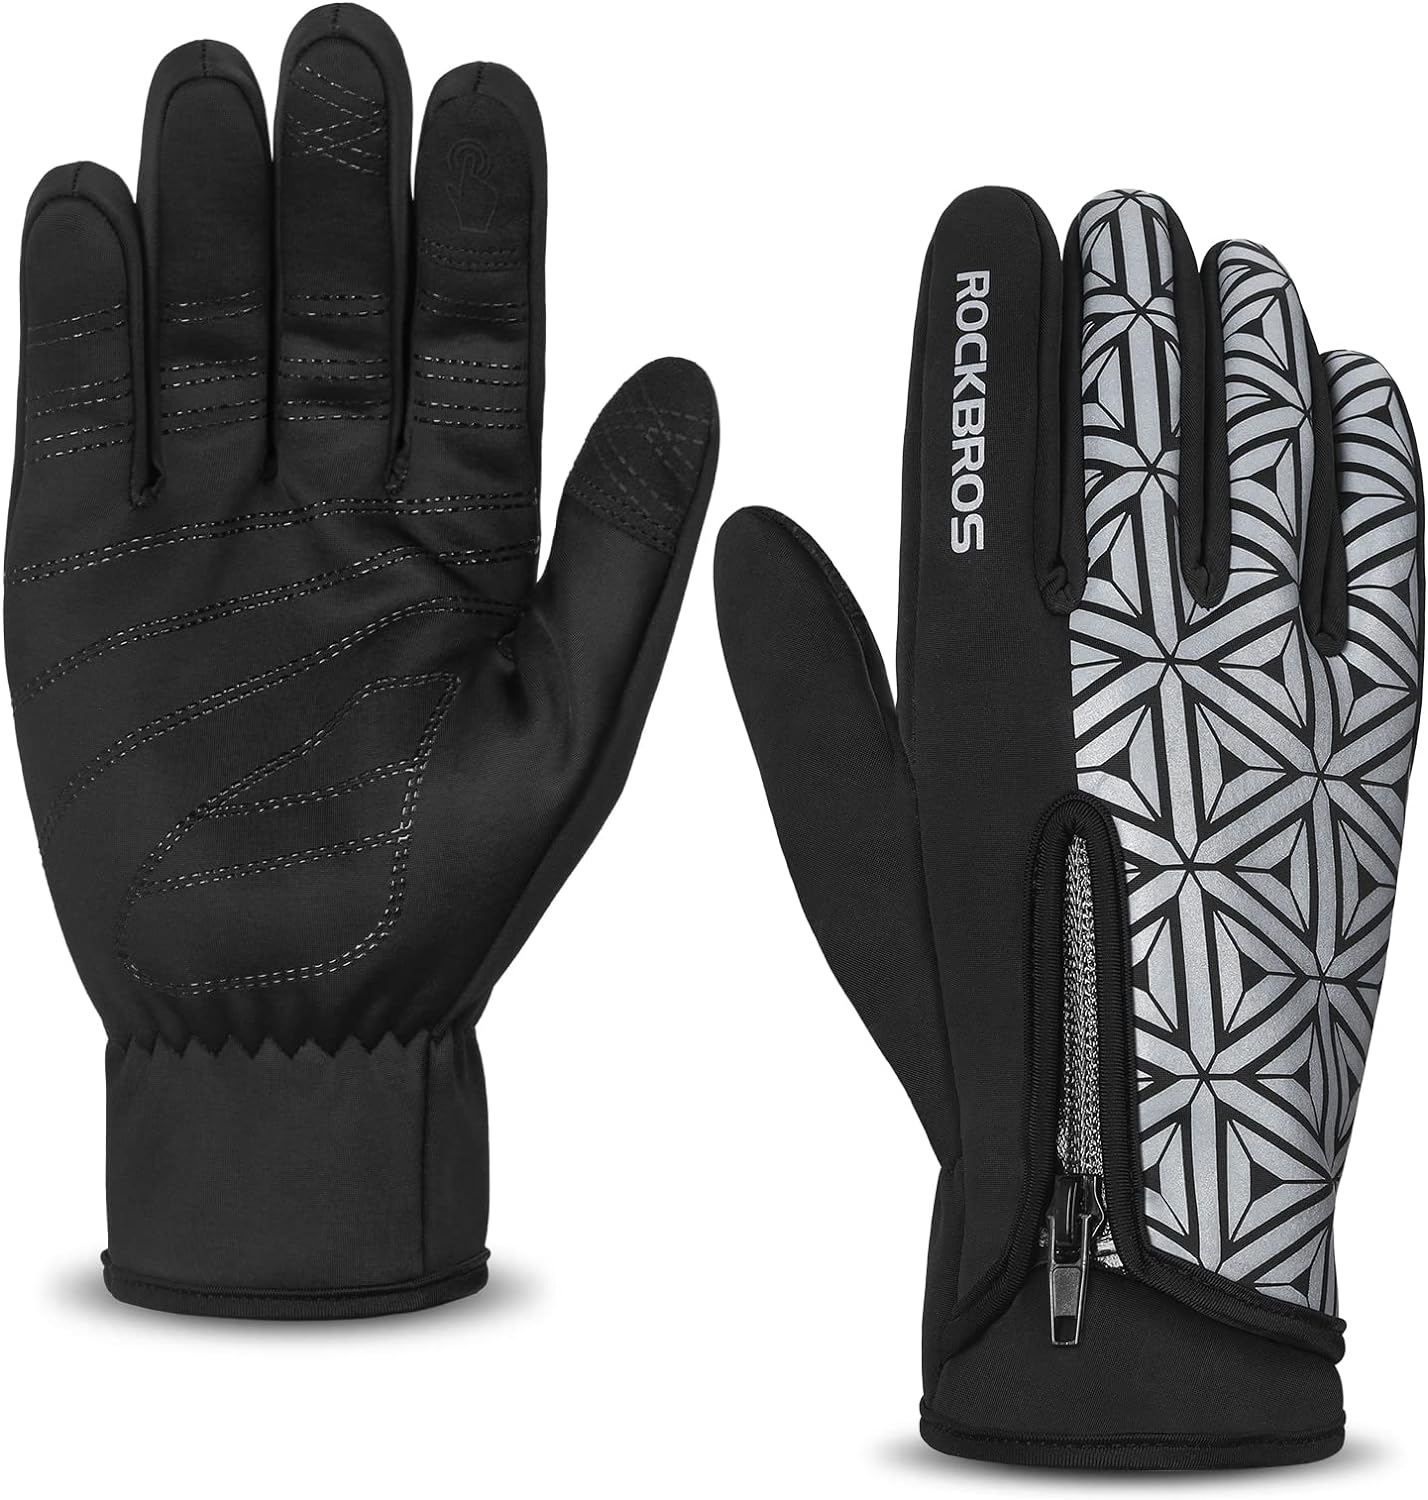 ROCKBROS Winter Cycling Gloves Double Layer Fabric Warm and Windproo